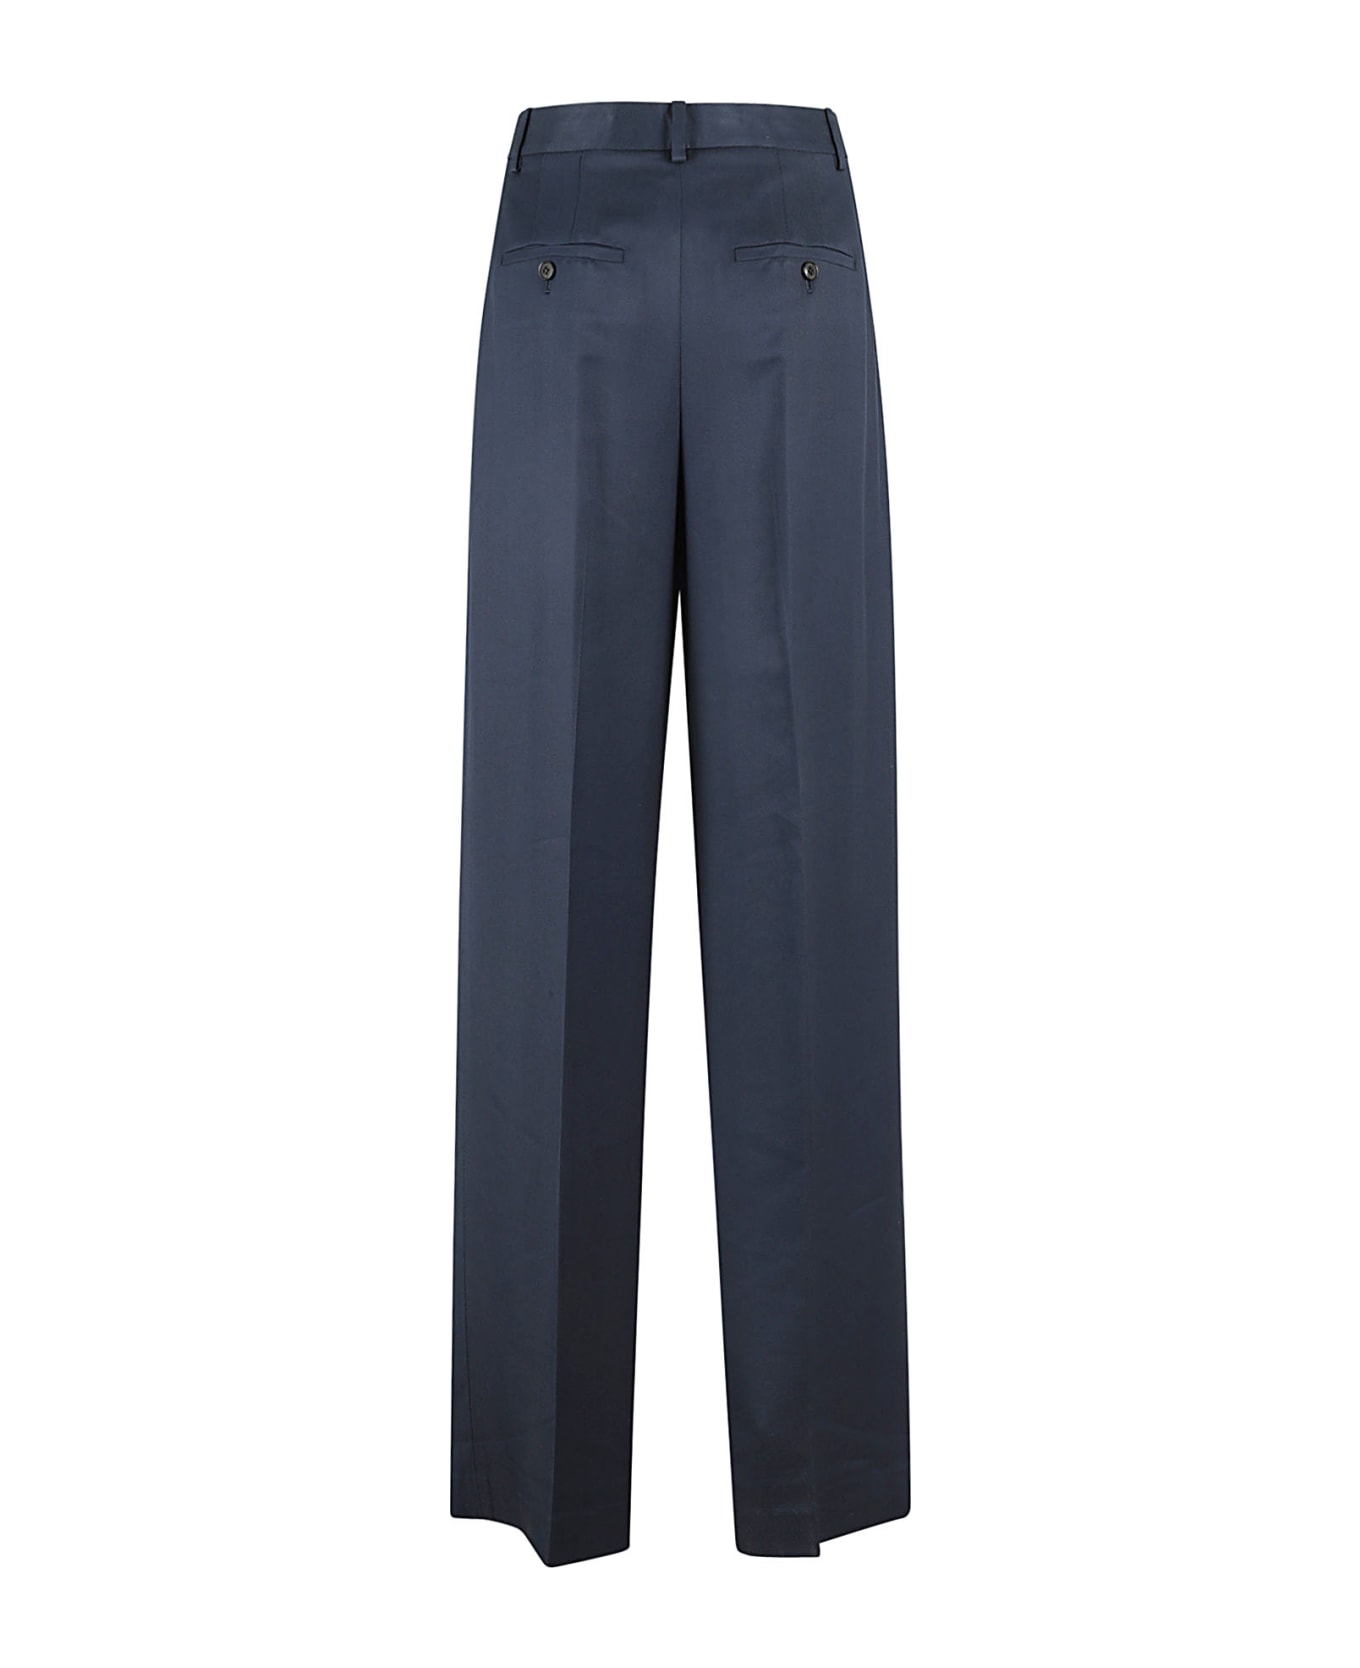 Theory Single Plt Pant - Xlv Nocturne Navy ボトムス